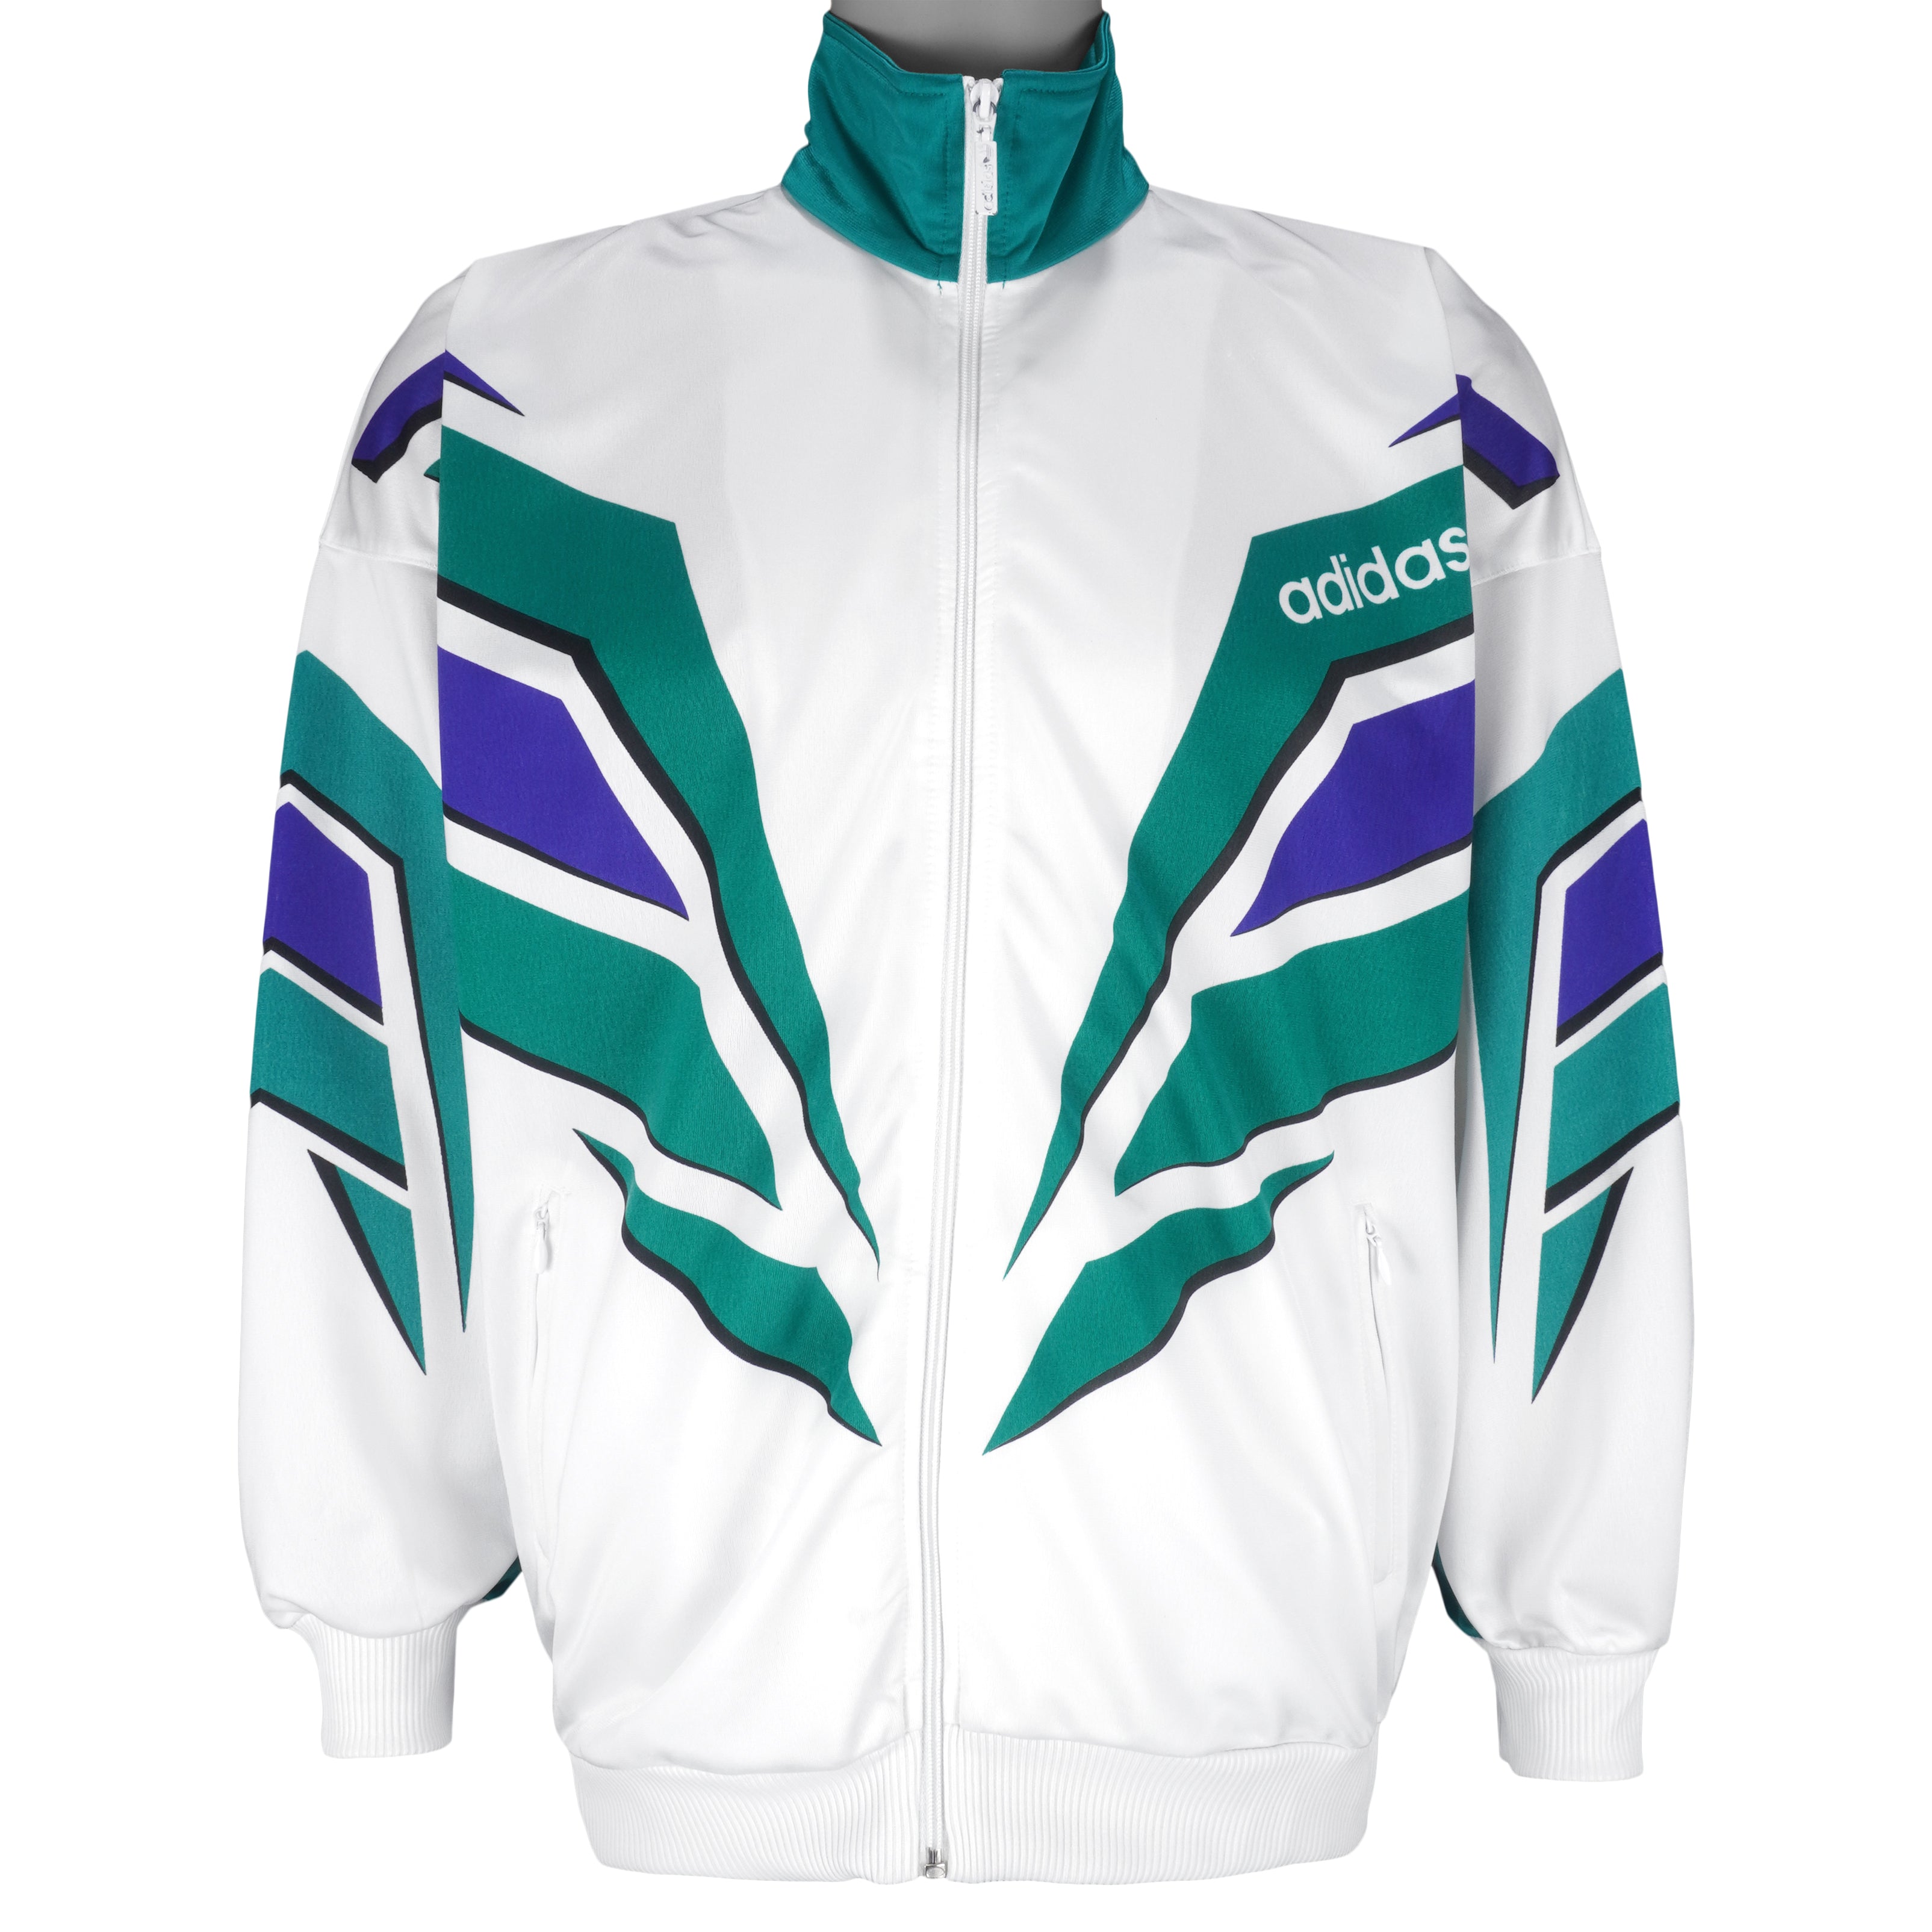 Vintage Adidas - White with Green Colorway Track Jacket 1990s